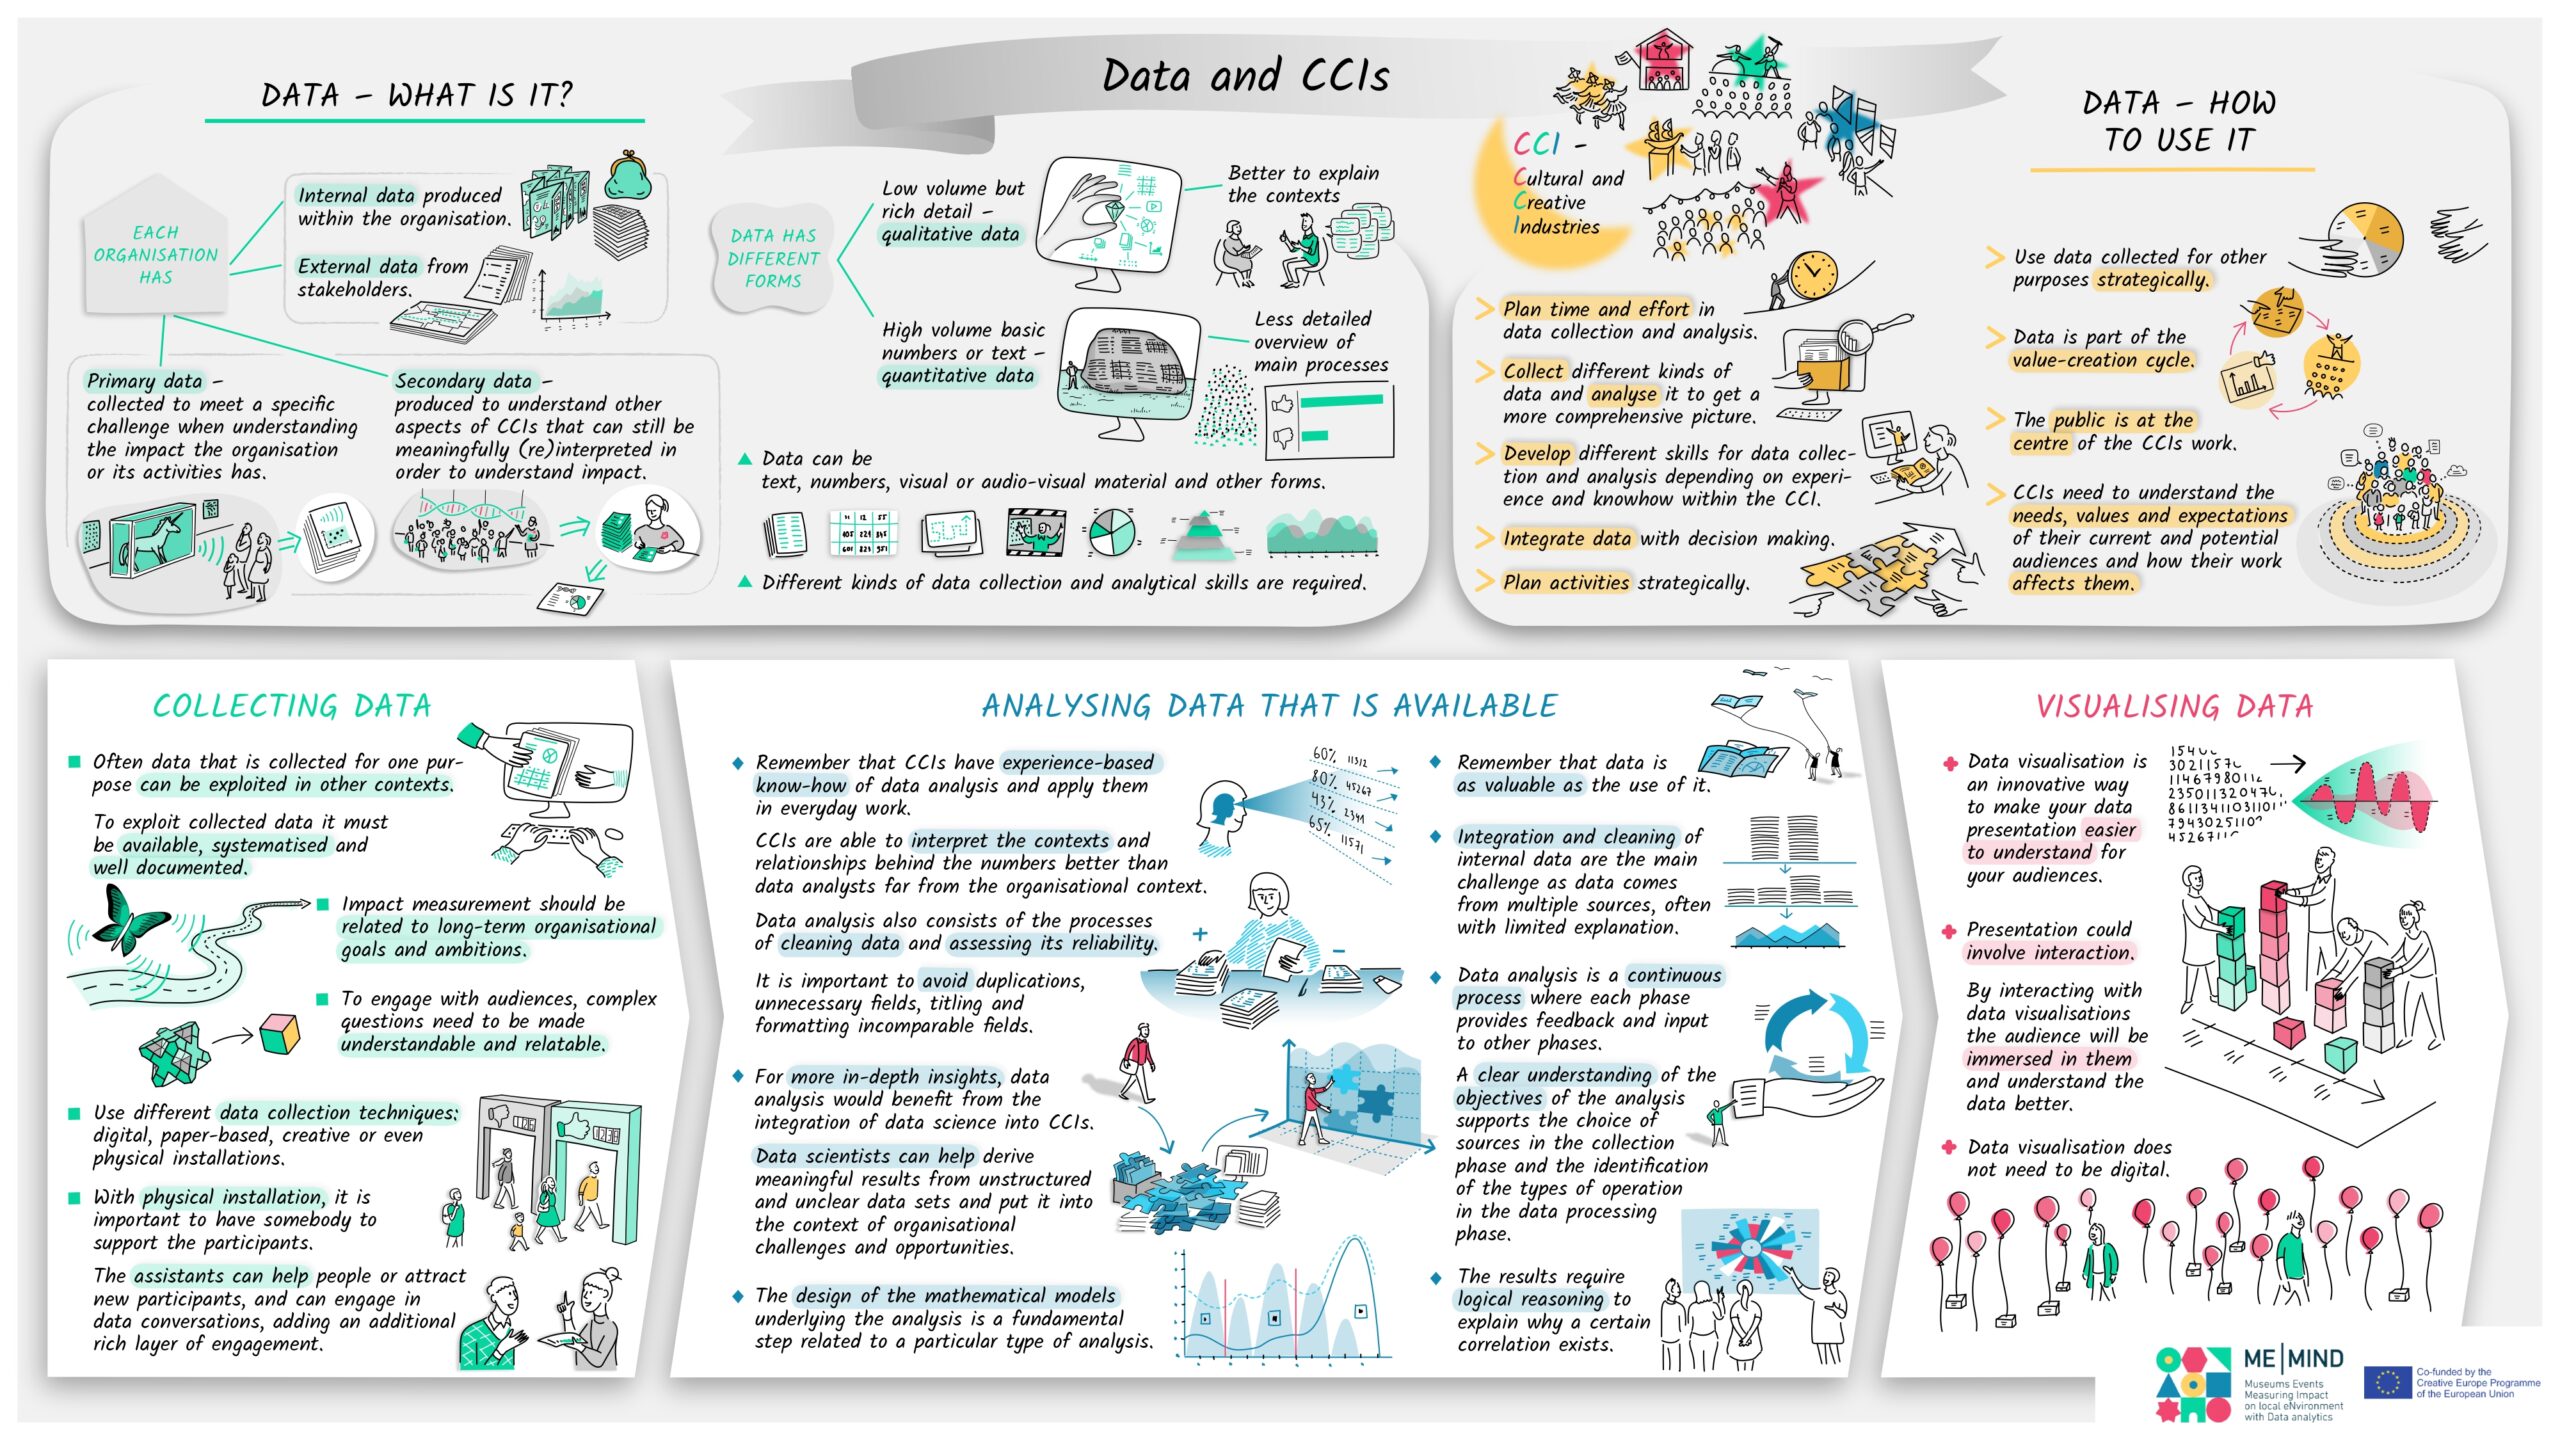 Me-Mind 1st infographic: Data and CCIs